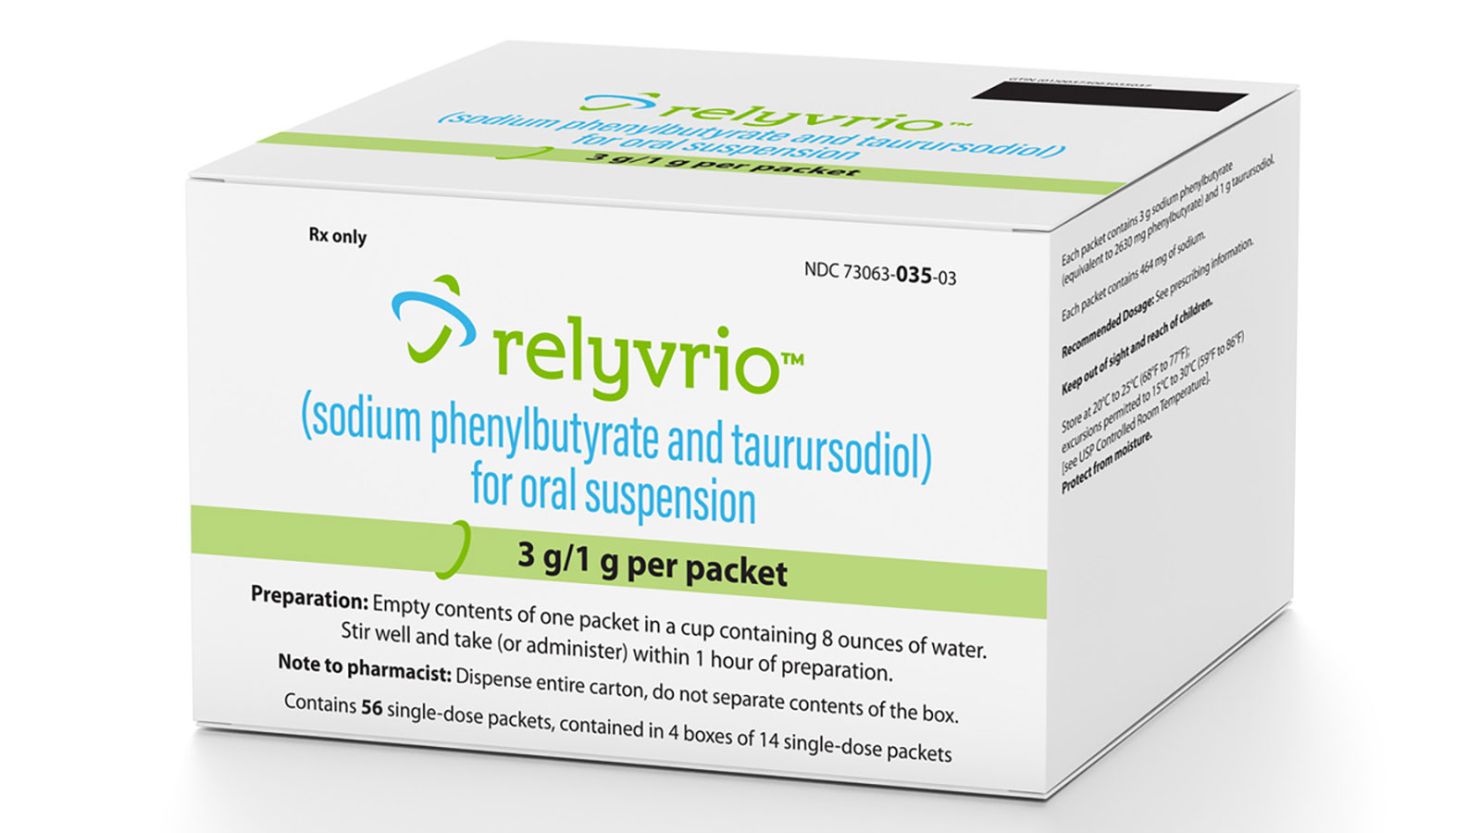 The FDA announced approval of Relyvrio, developed by Amylyx Pharmaceuticals, on Thursday. The oral medication works as a standalone therapy or when added to other treatments, according to the company, and it has been shown to slow disease progression